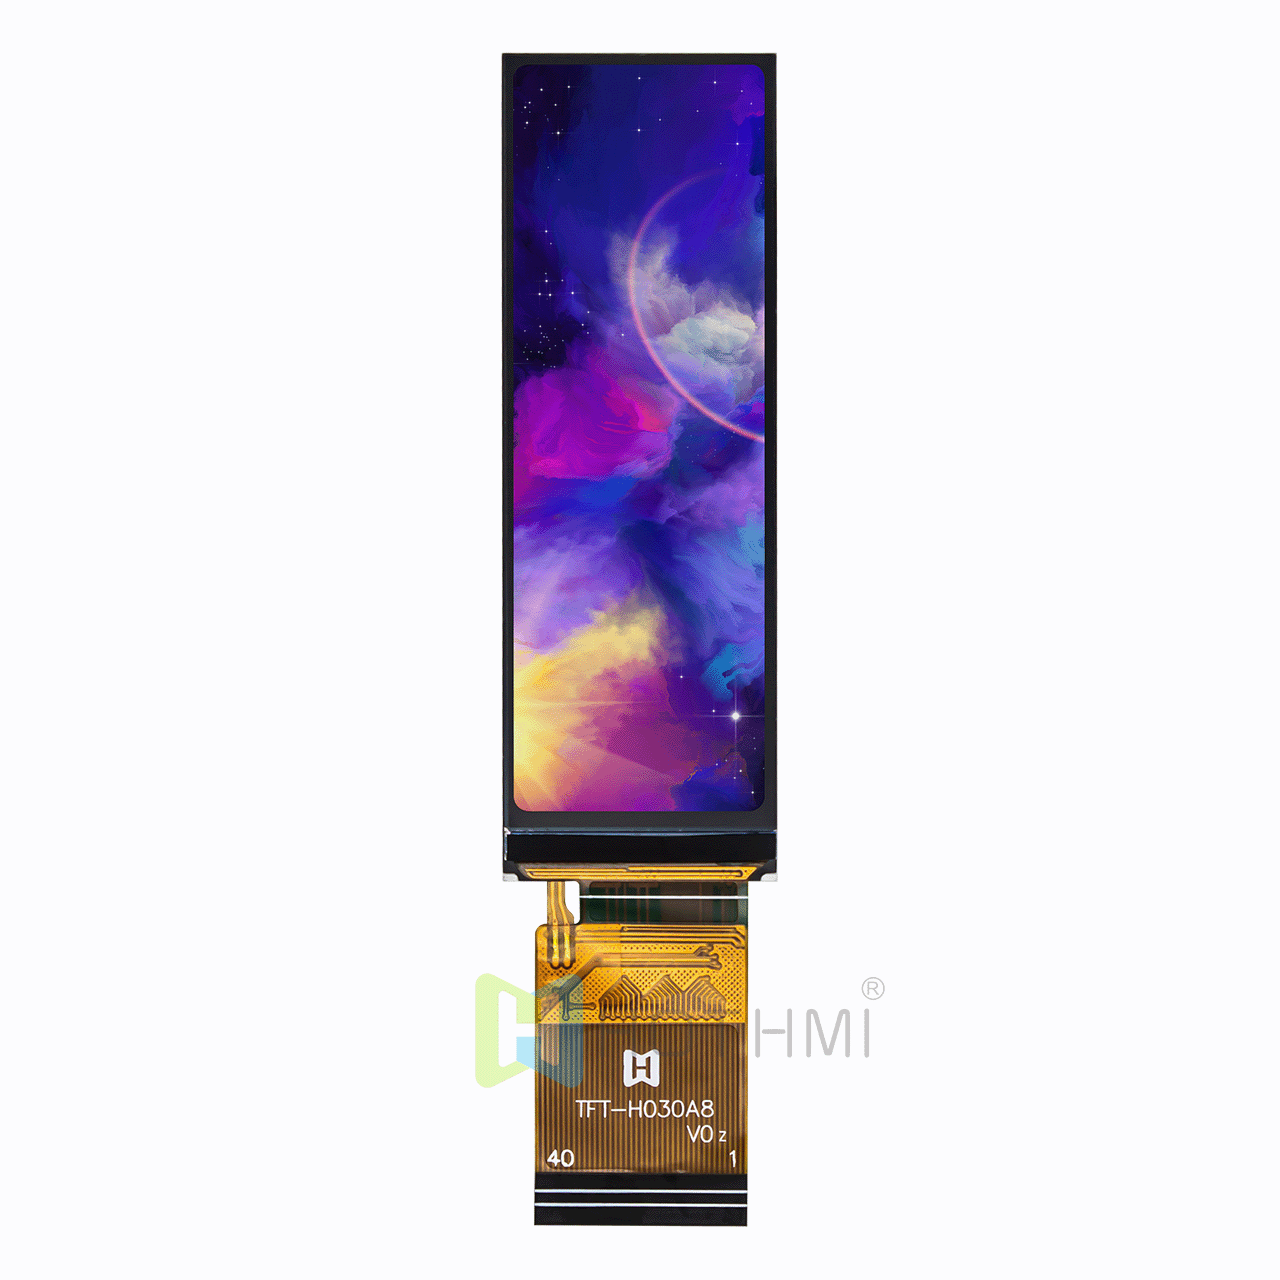 3.0 inch bar TFT LCD display module/IPS full viewing angle/268x800 dots/RGB+SPI interface/ST7701S/sunlight visible/wide temperature/compatible with Arduino